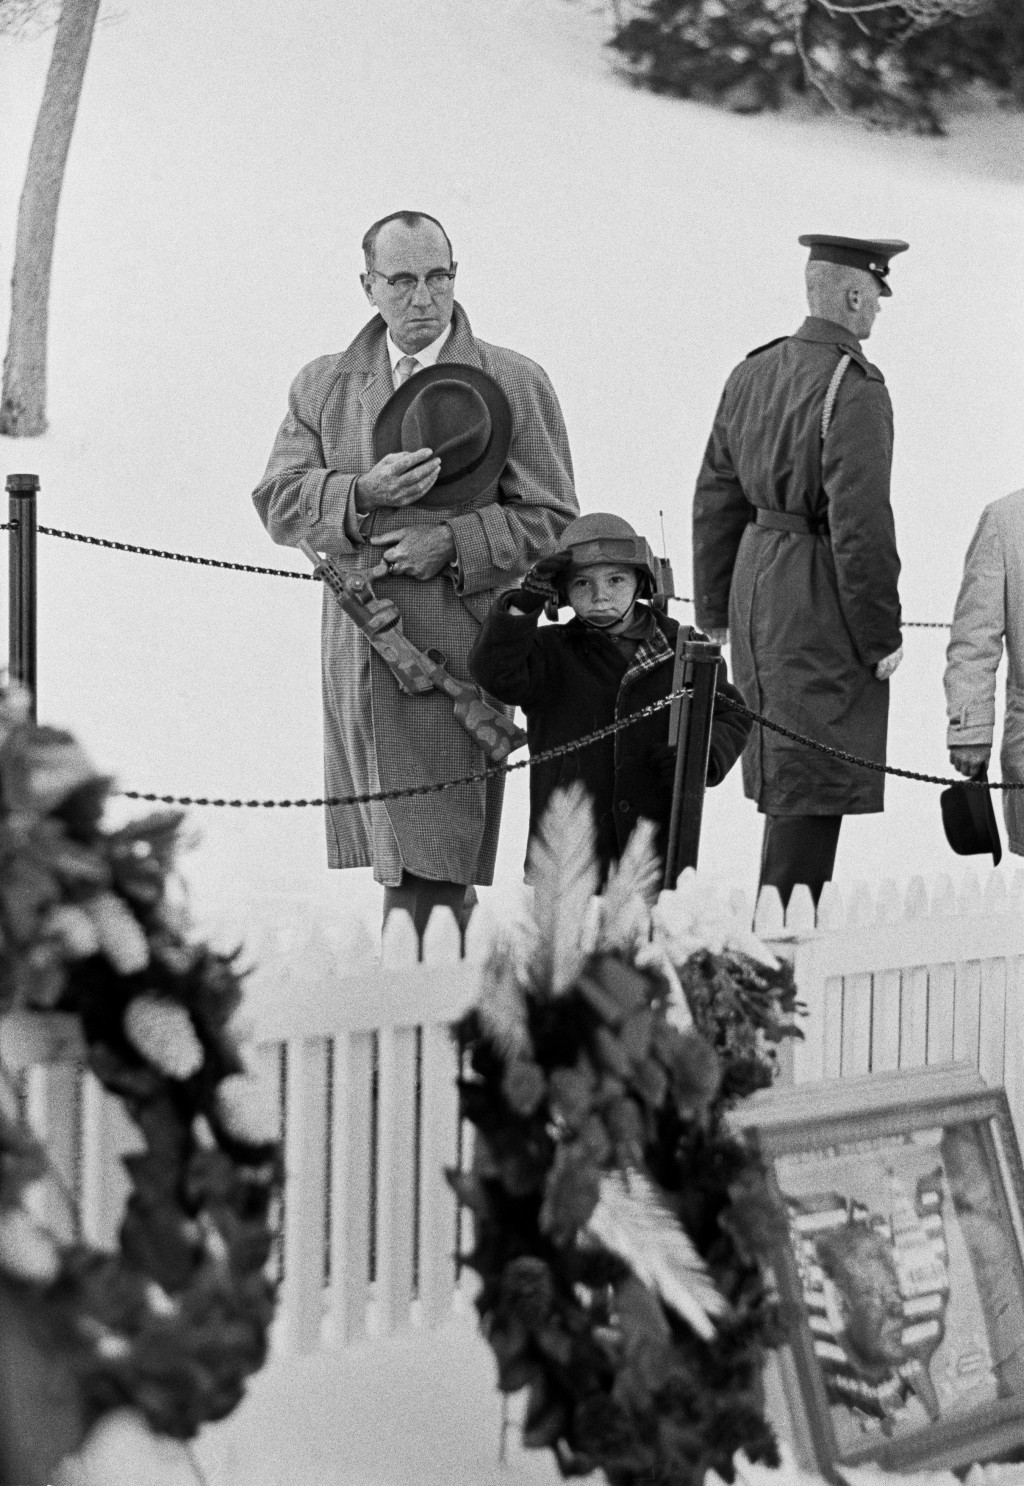 USA. Washington, D.C. 1963. A father and boy with a toy helmet and gun give a salute at the grave of John F. Kennedy in Arlington cemetary.